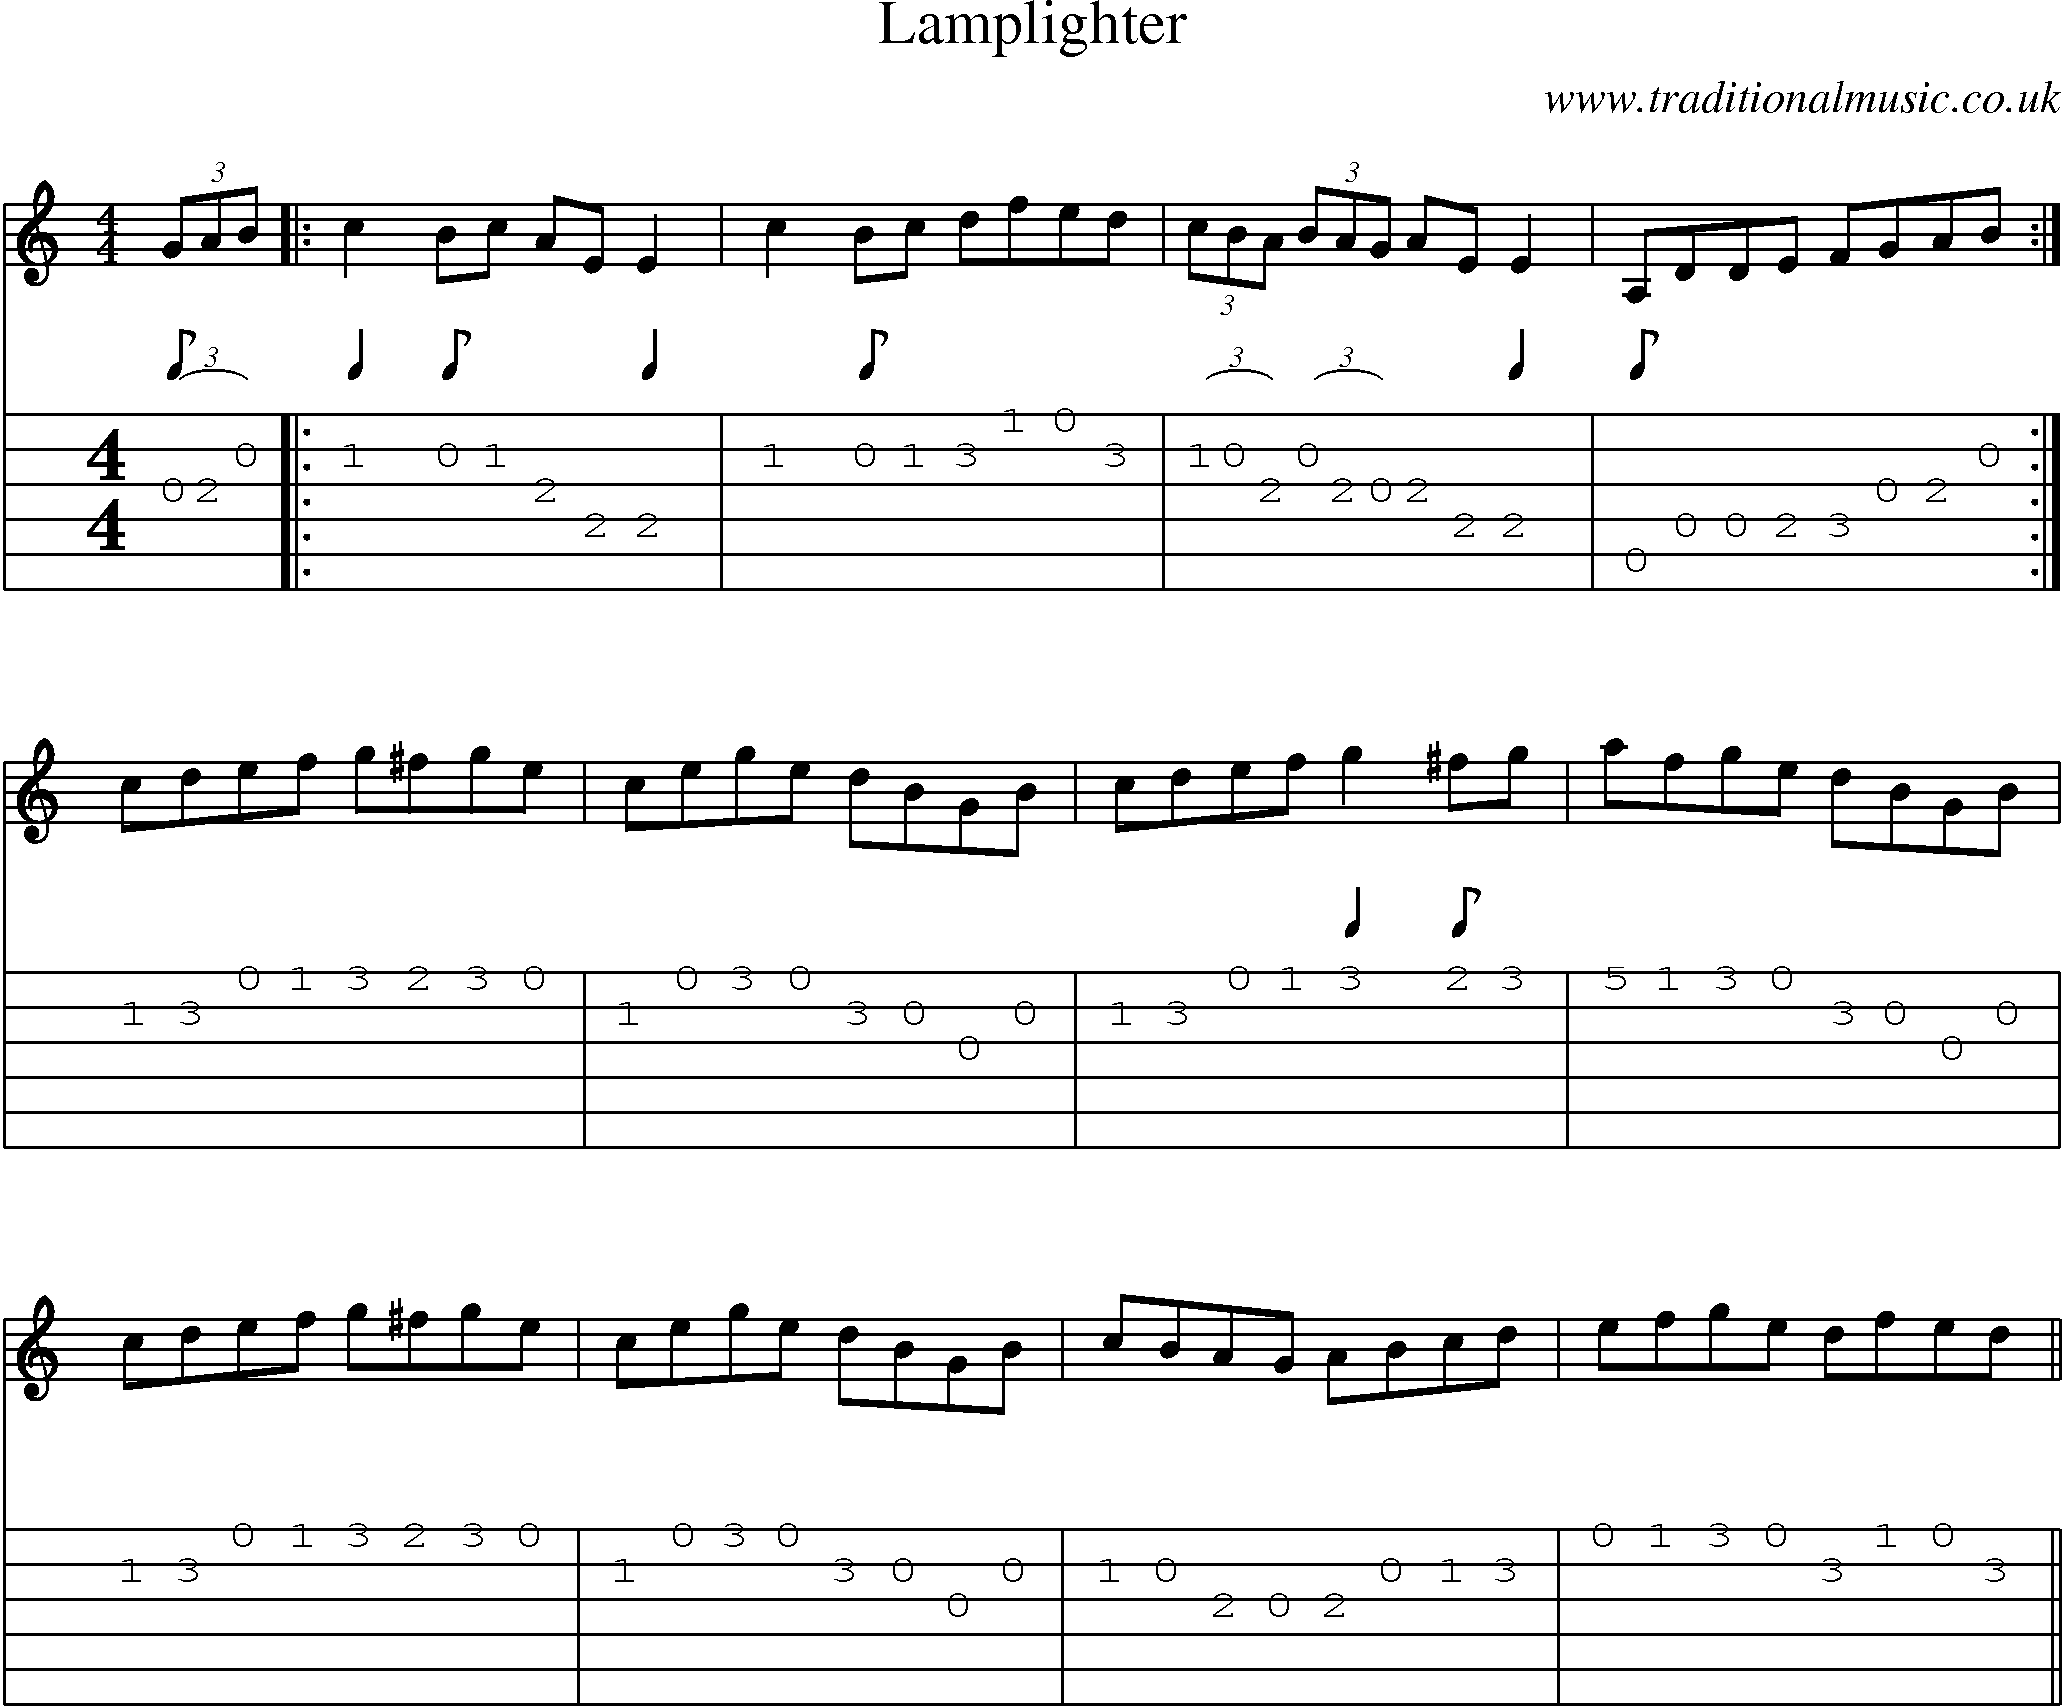 Music Score and Guitar Tabs for Lamplighter